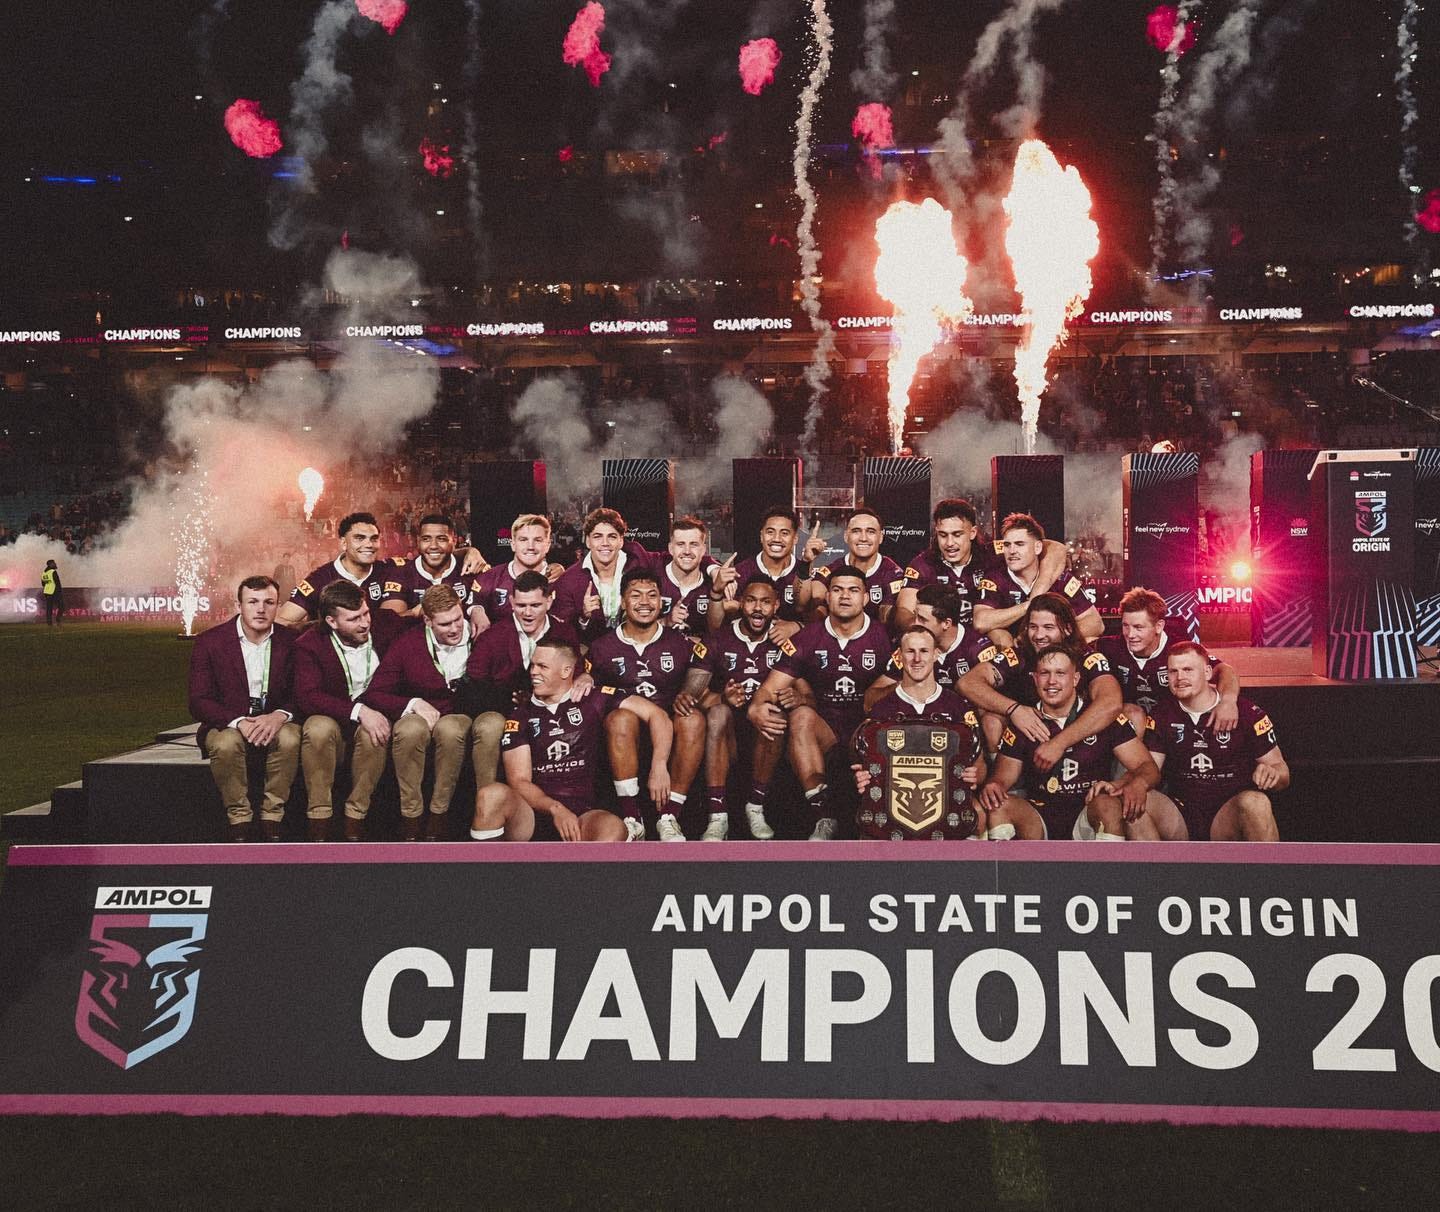 May be an image of text that says "AMPIONS CHAMPIONS CHAMPIONS CHAMPIONS CHAMPIONS CHAMPIONS CHAMPIONS CHAMPI CHAMPIONS CHAMPRONS CHAMPIONS CHAMPIO ORIGIN AMPIC AMPOL AMPOL STATE OF ORIGIN CHAMPIONS 20"